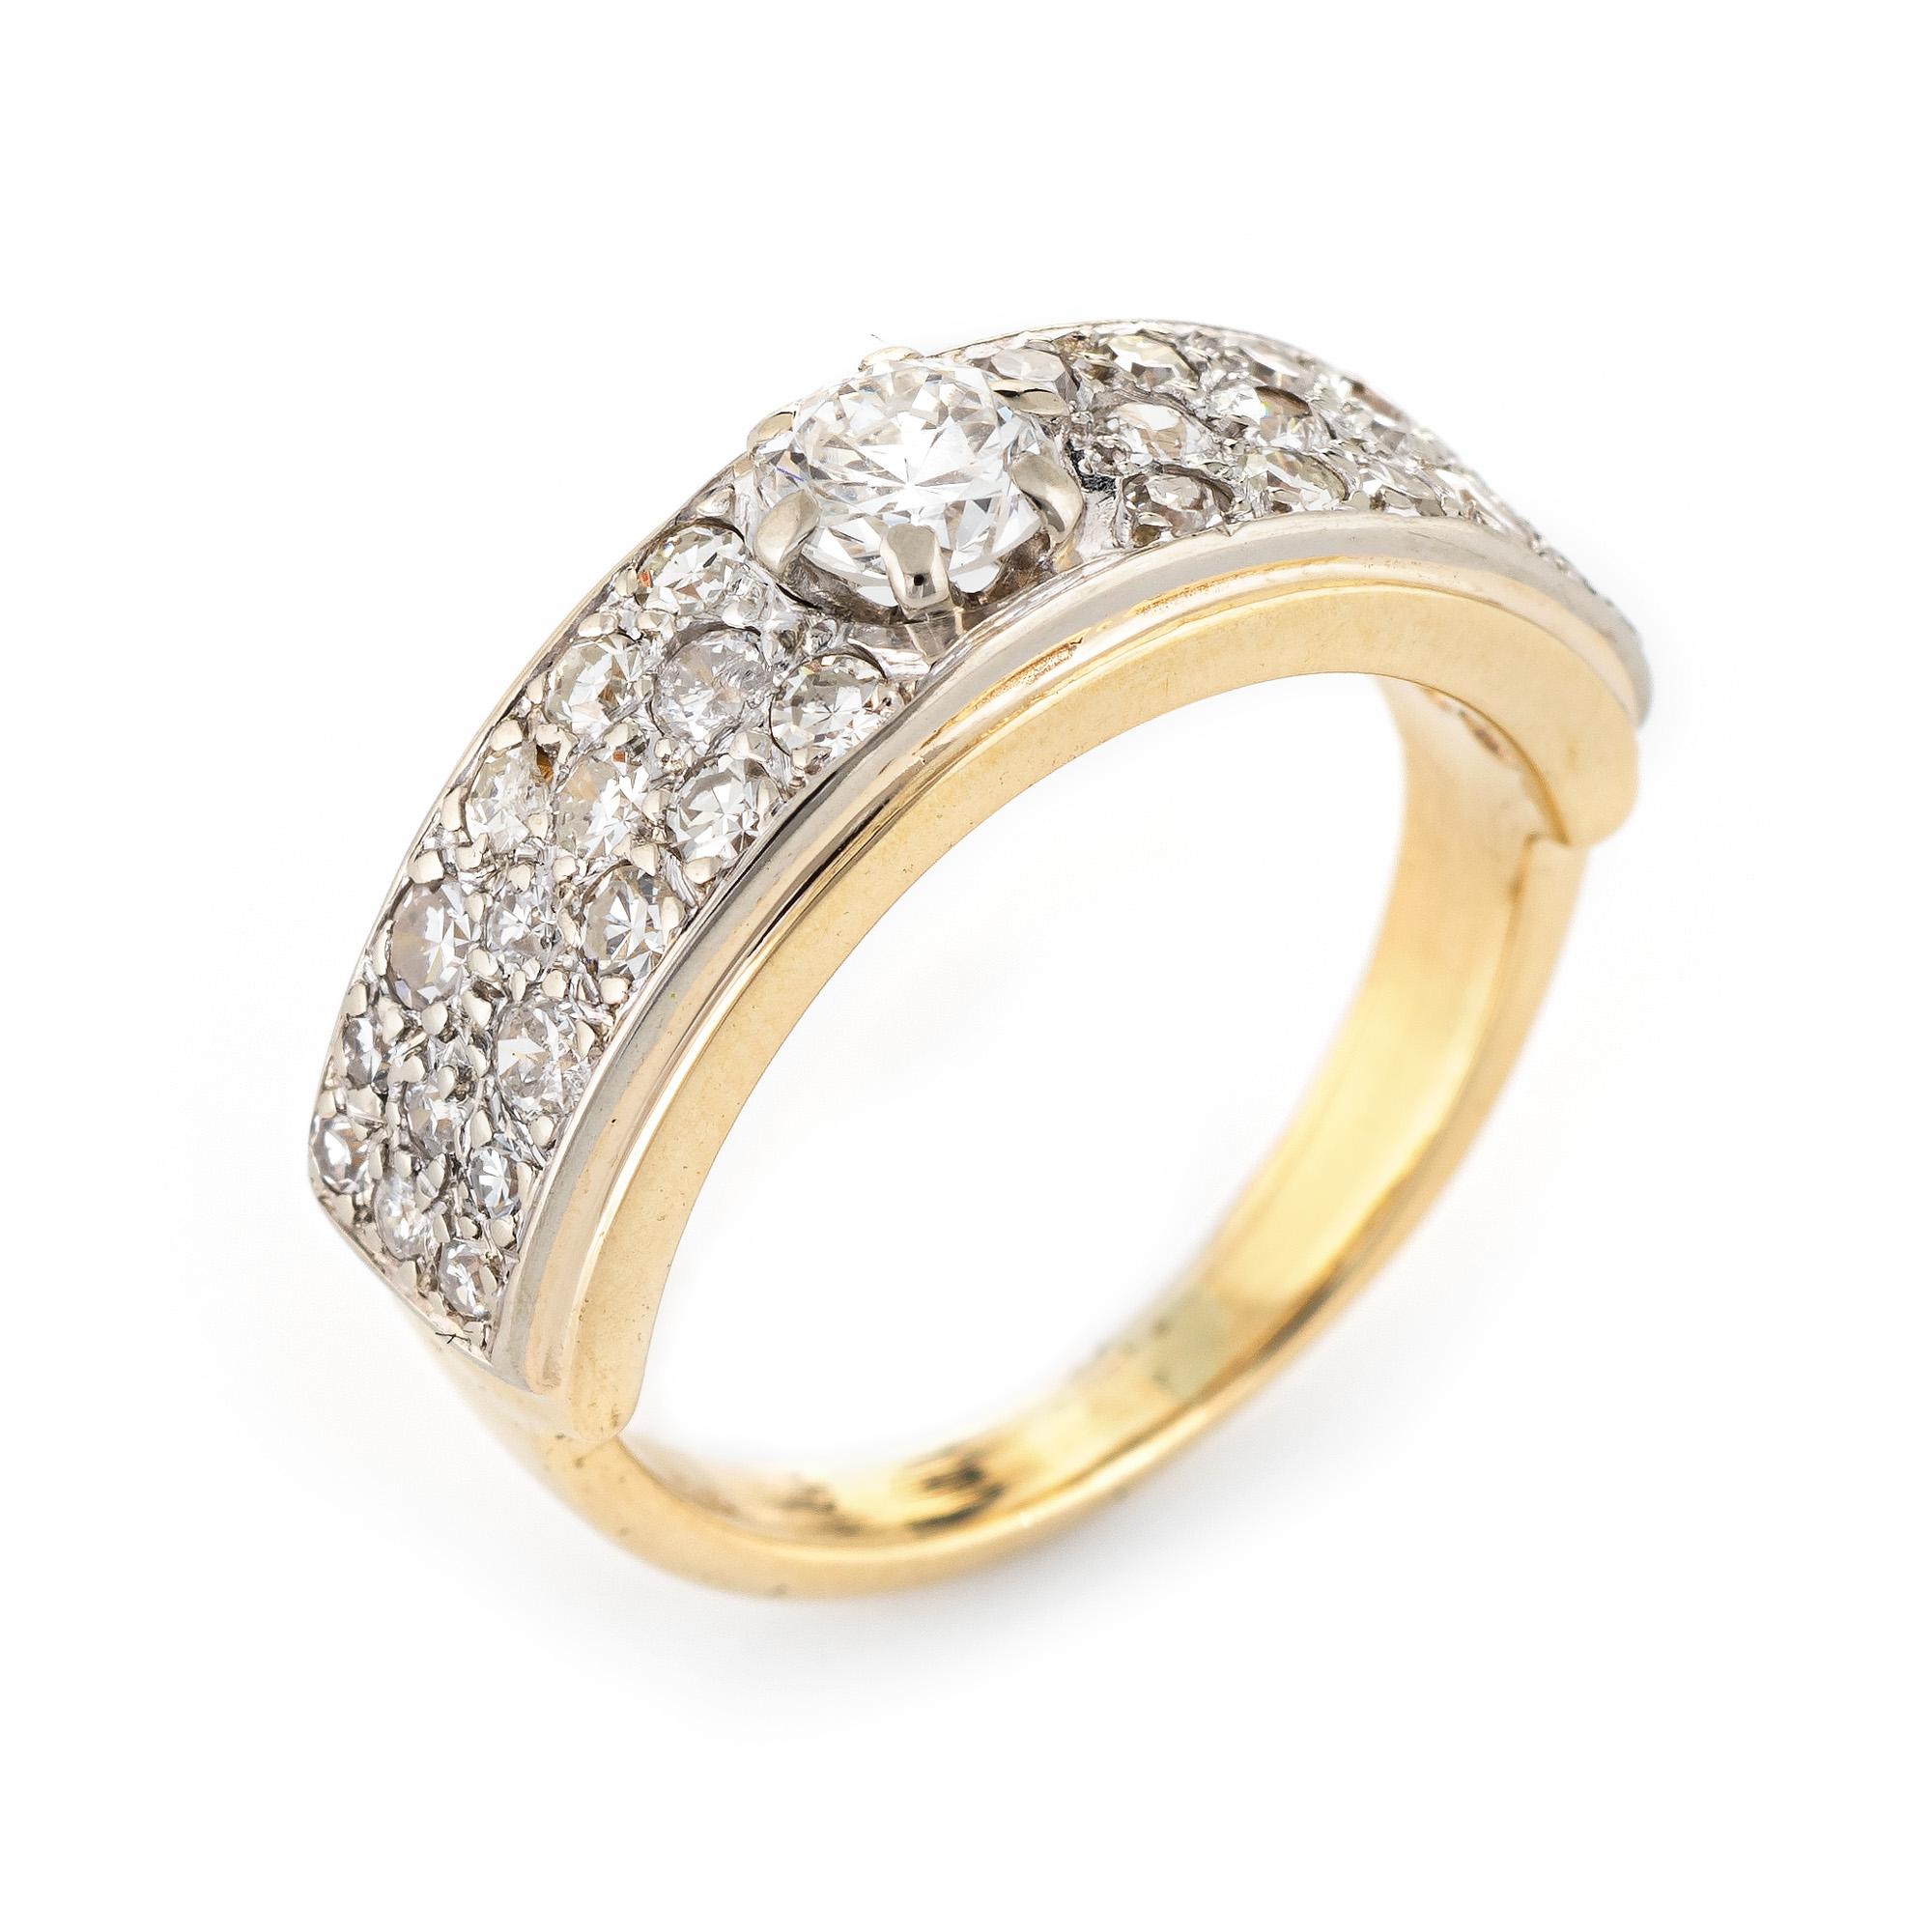 Stylish vintage diamond band (circa 1940s to 1950s) crafted in 14 karat yellow gold. 

Centrally mounted old European cut diamond is estimated at 0.36 carats, accented with 32 estimated 0.02 carat single cut diamonds. The total diamond weight is